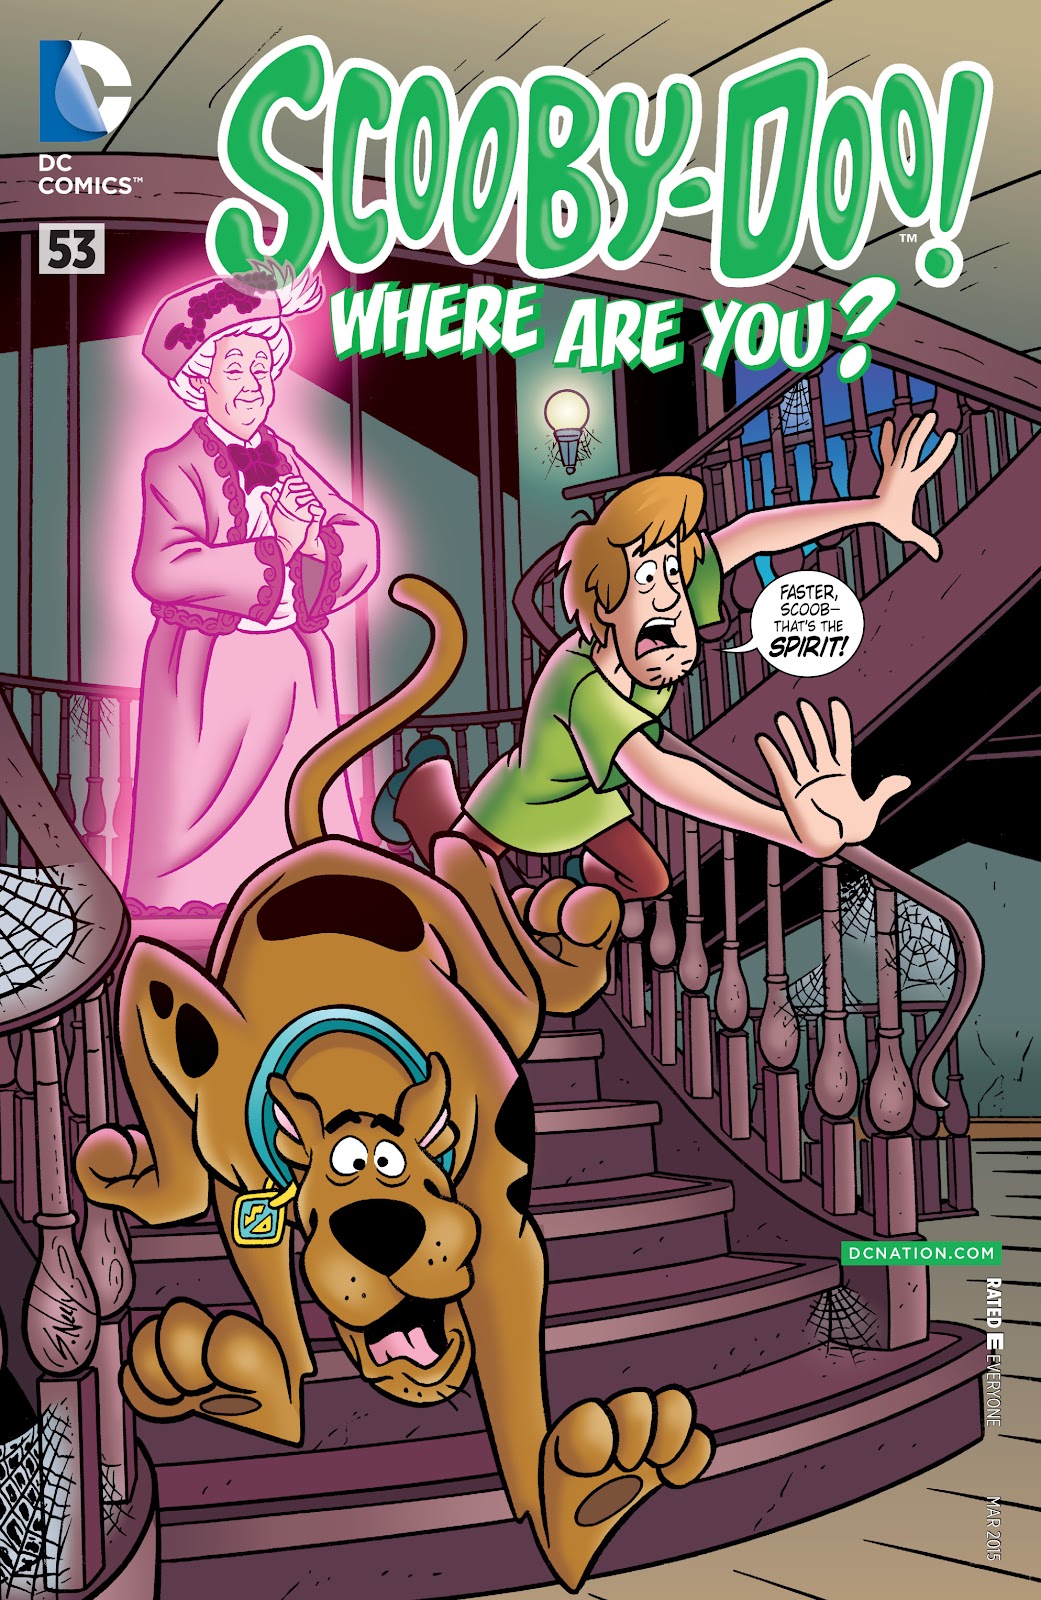 Scooby-Doo: Where Are You? issue 53 - Page 1